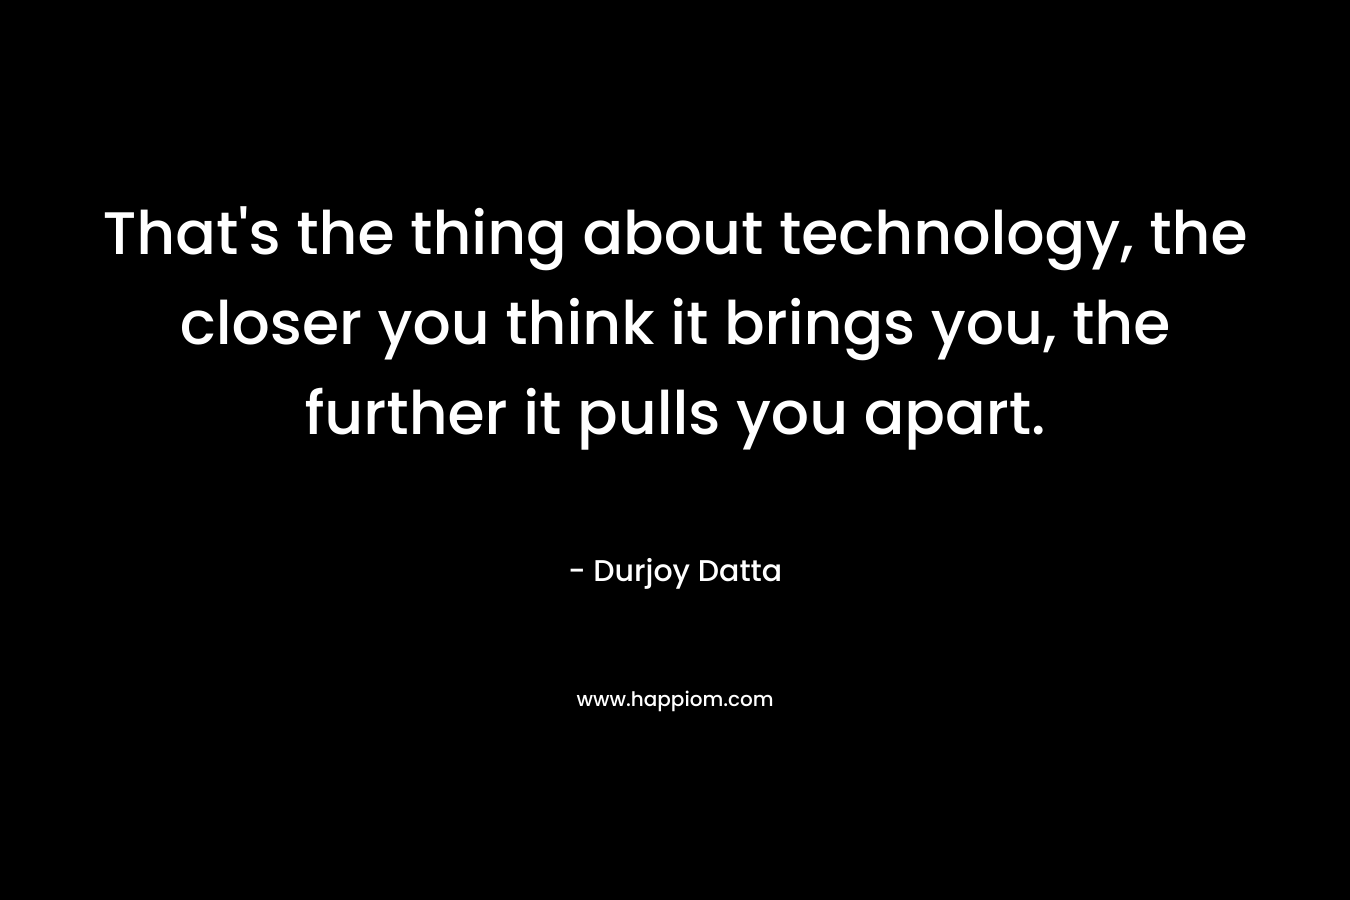 That's the thing about technology, the closer you think it brings you, the further it pulls you apart.